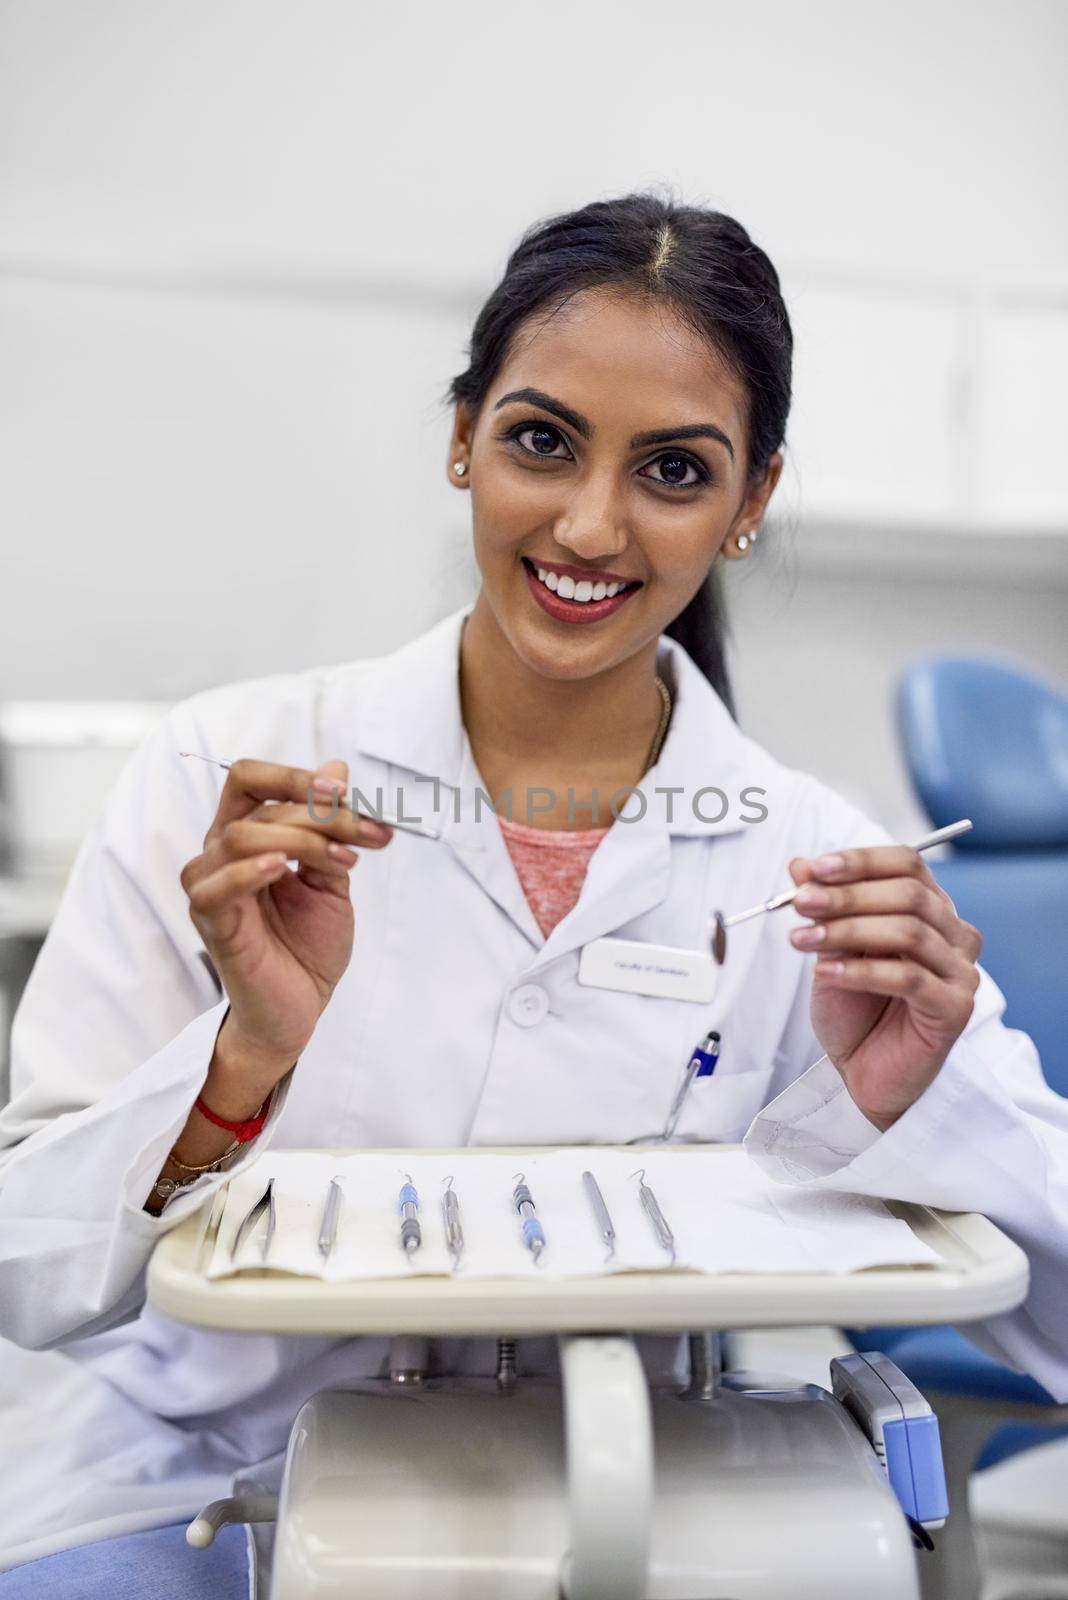 Portrait of a young female dentist working with surgical instruments in her office.